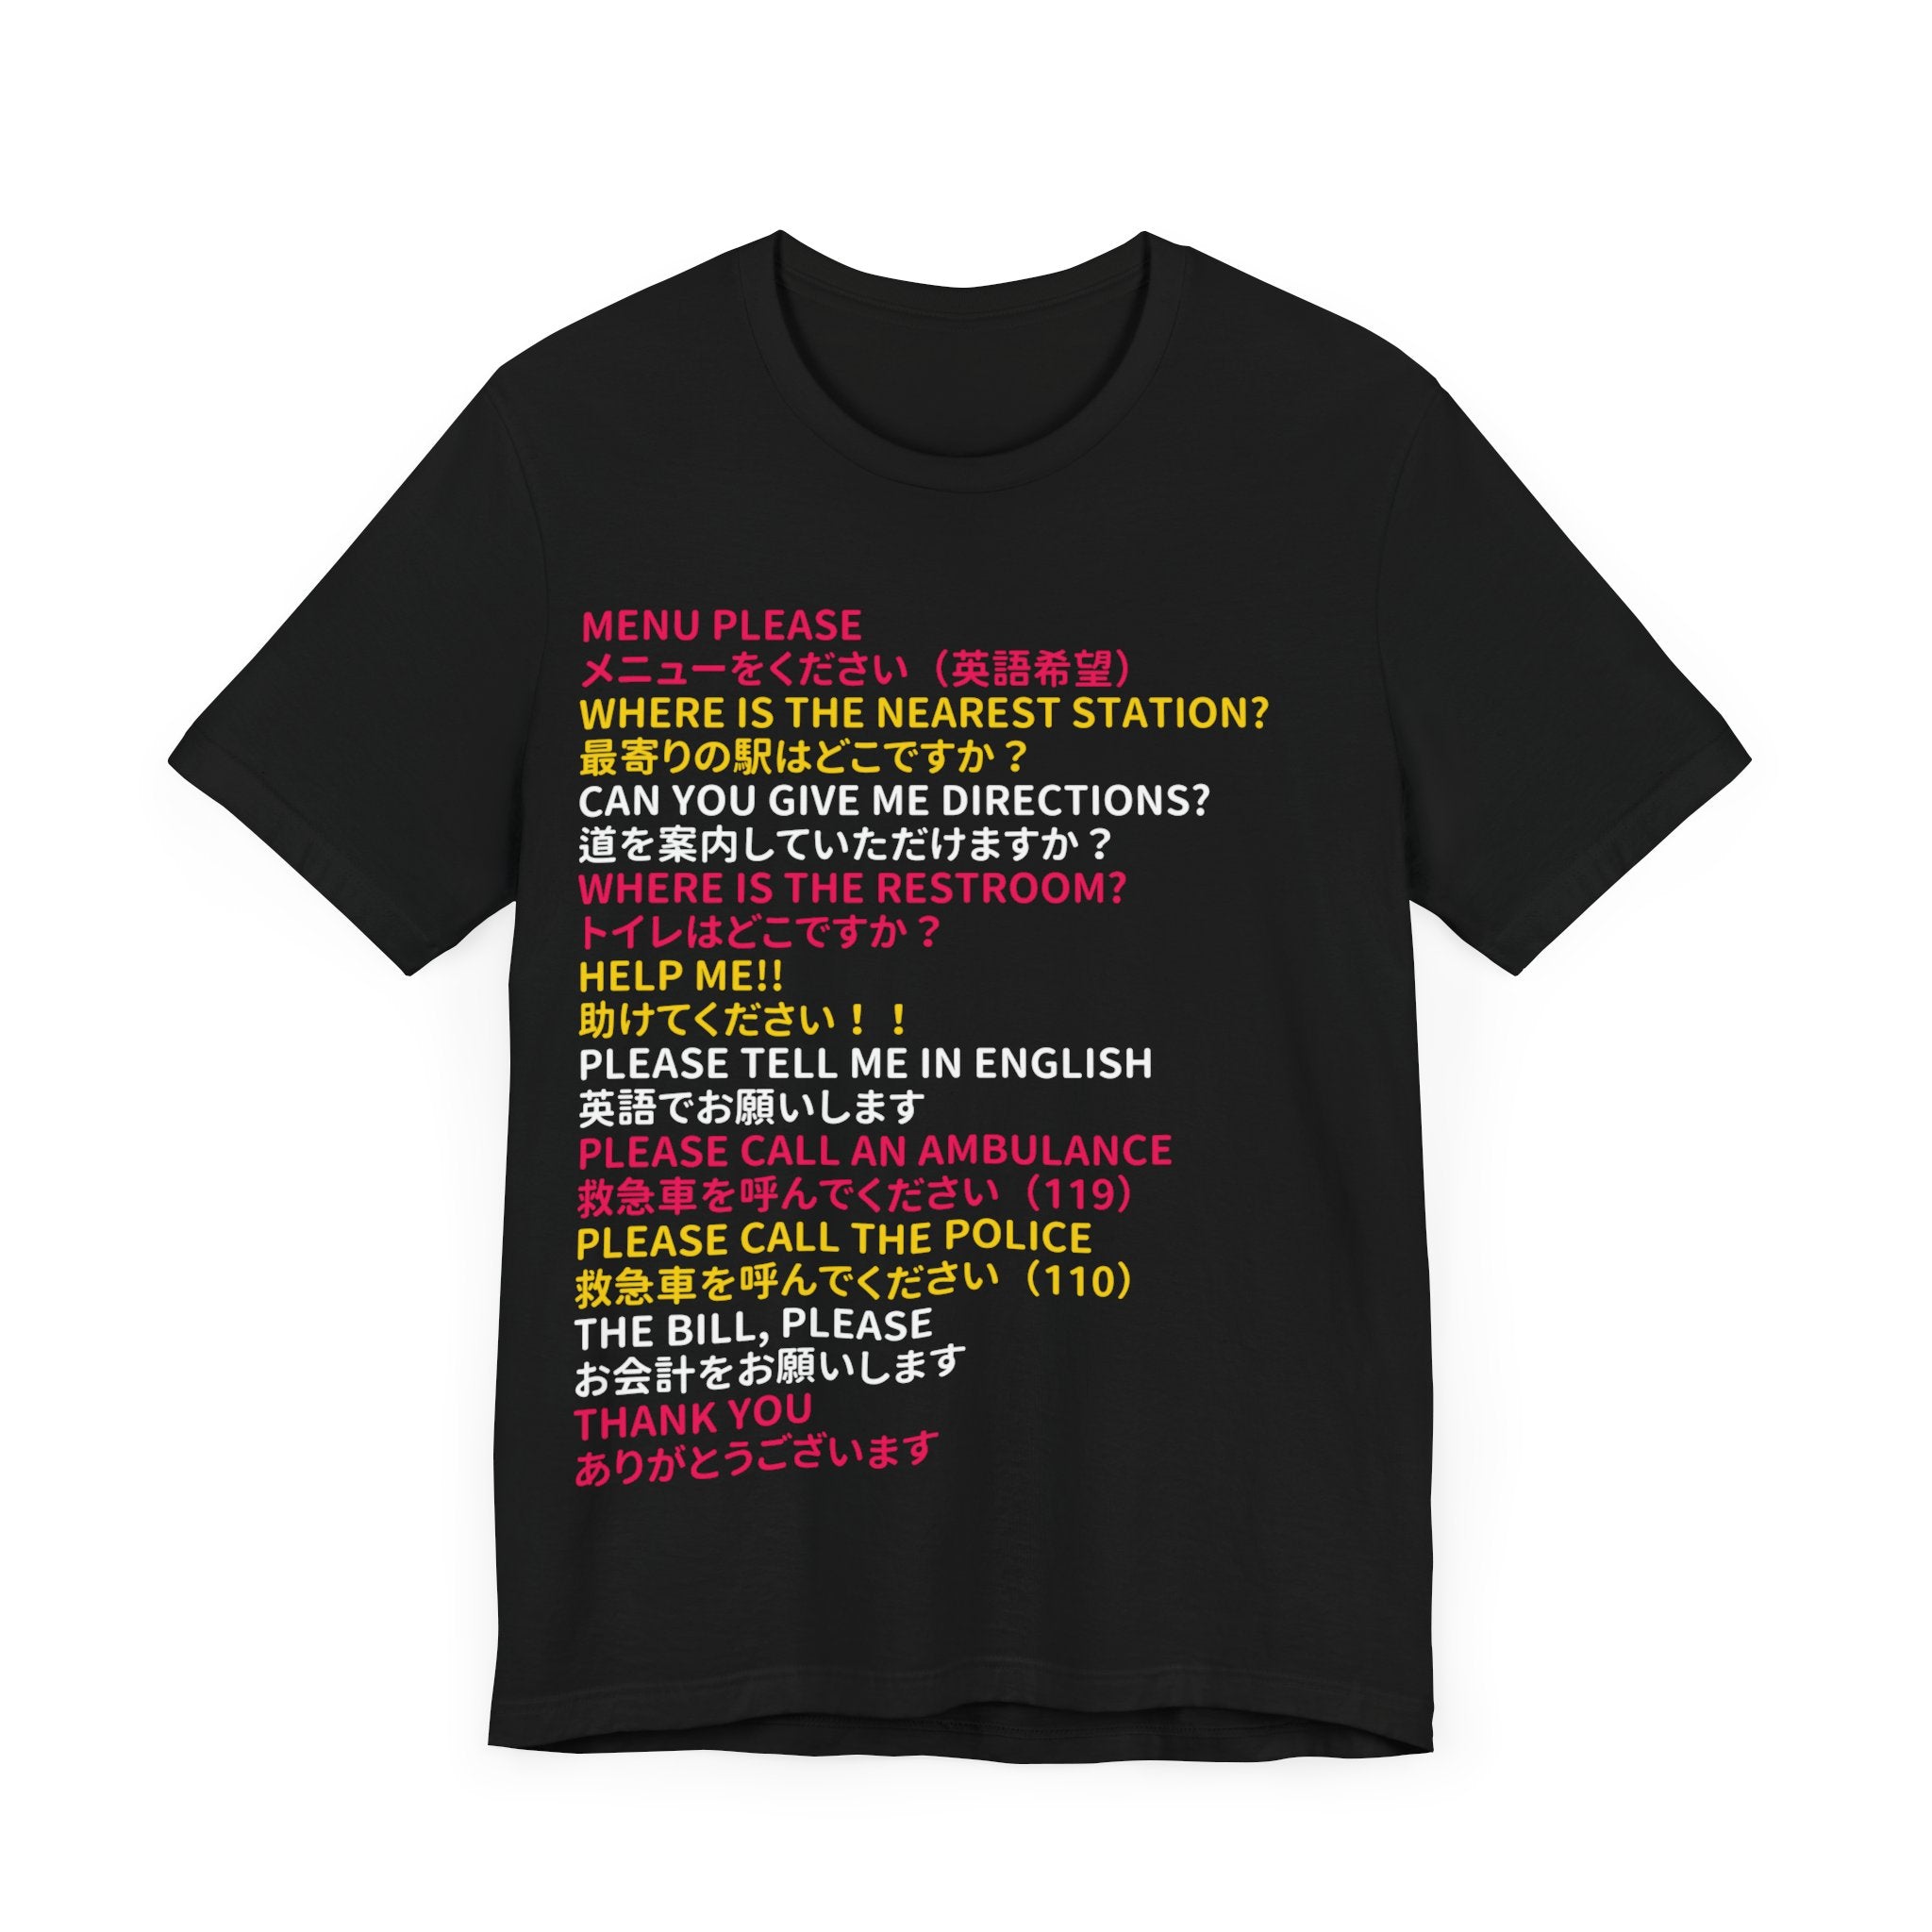 Essential Japanese Phrases T-Shirt for Tourists - Color-Coded English-Japanese Guide - Soft Cotton Unisex Tee